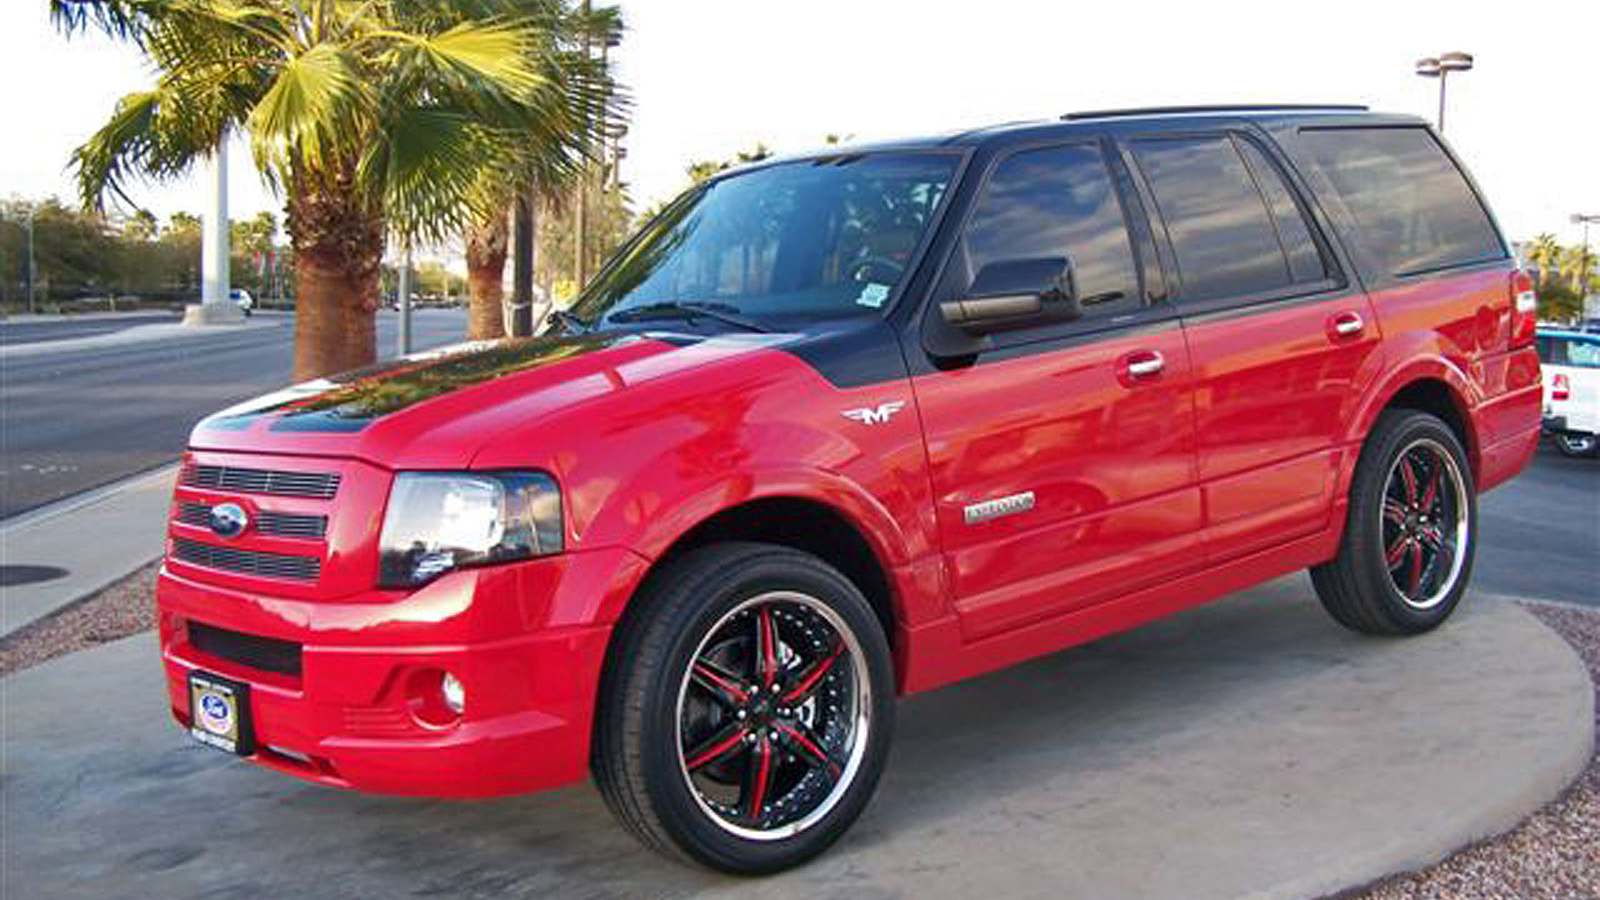 2008 Ford expedition warranty info #2